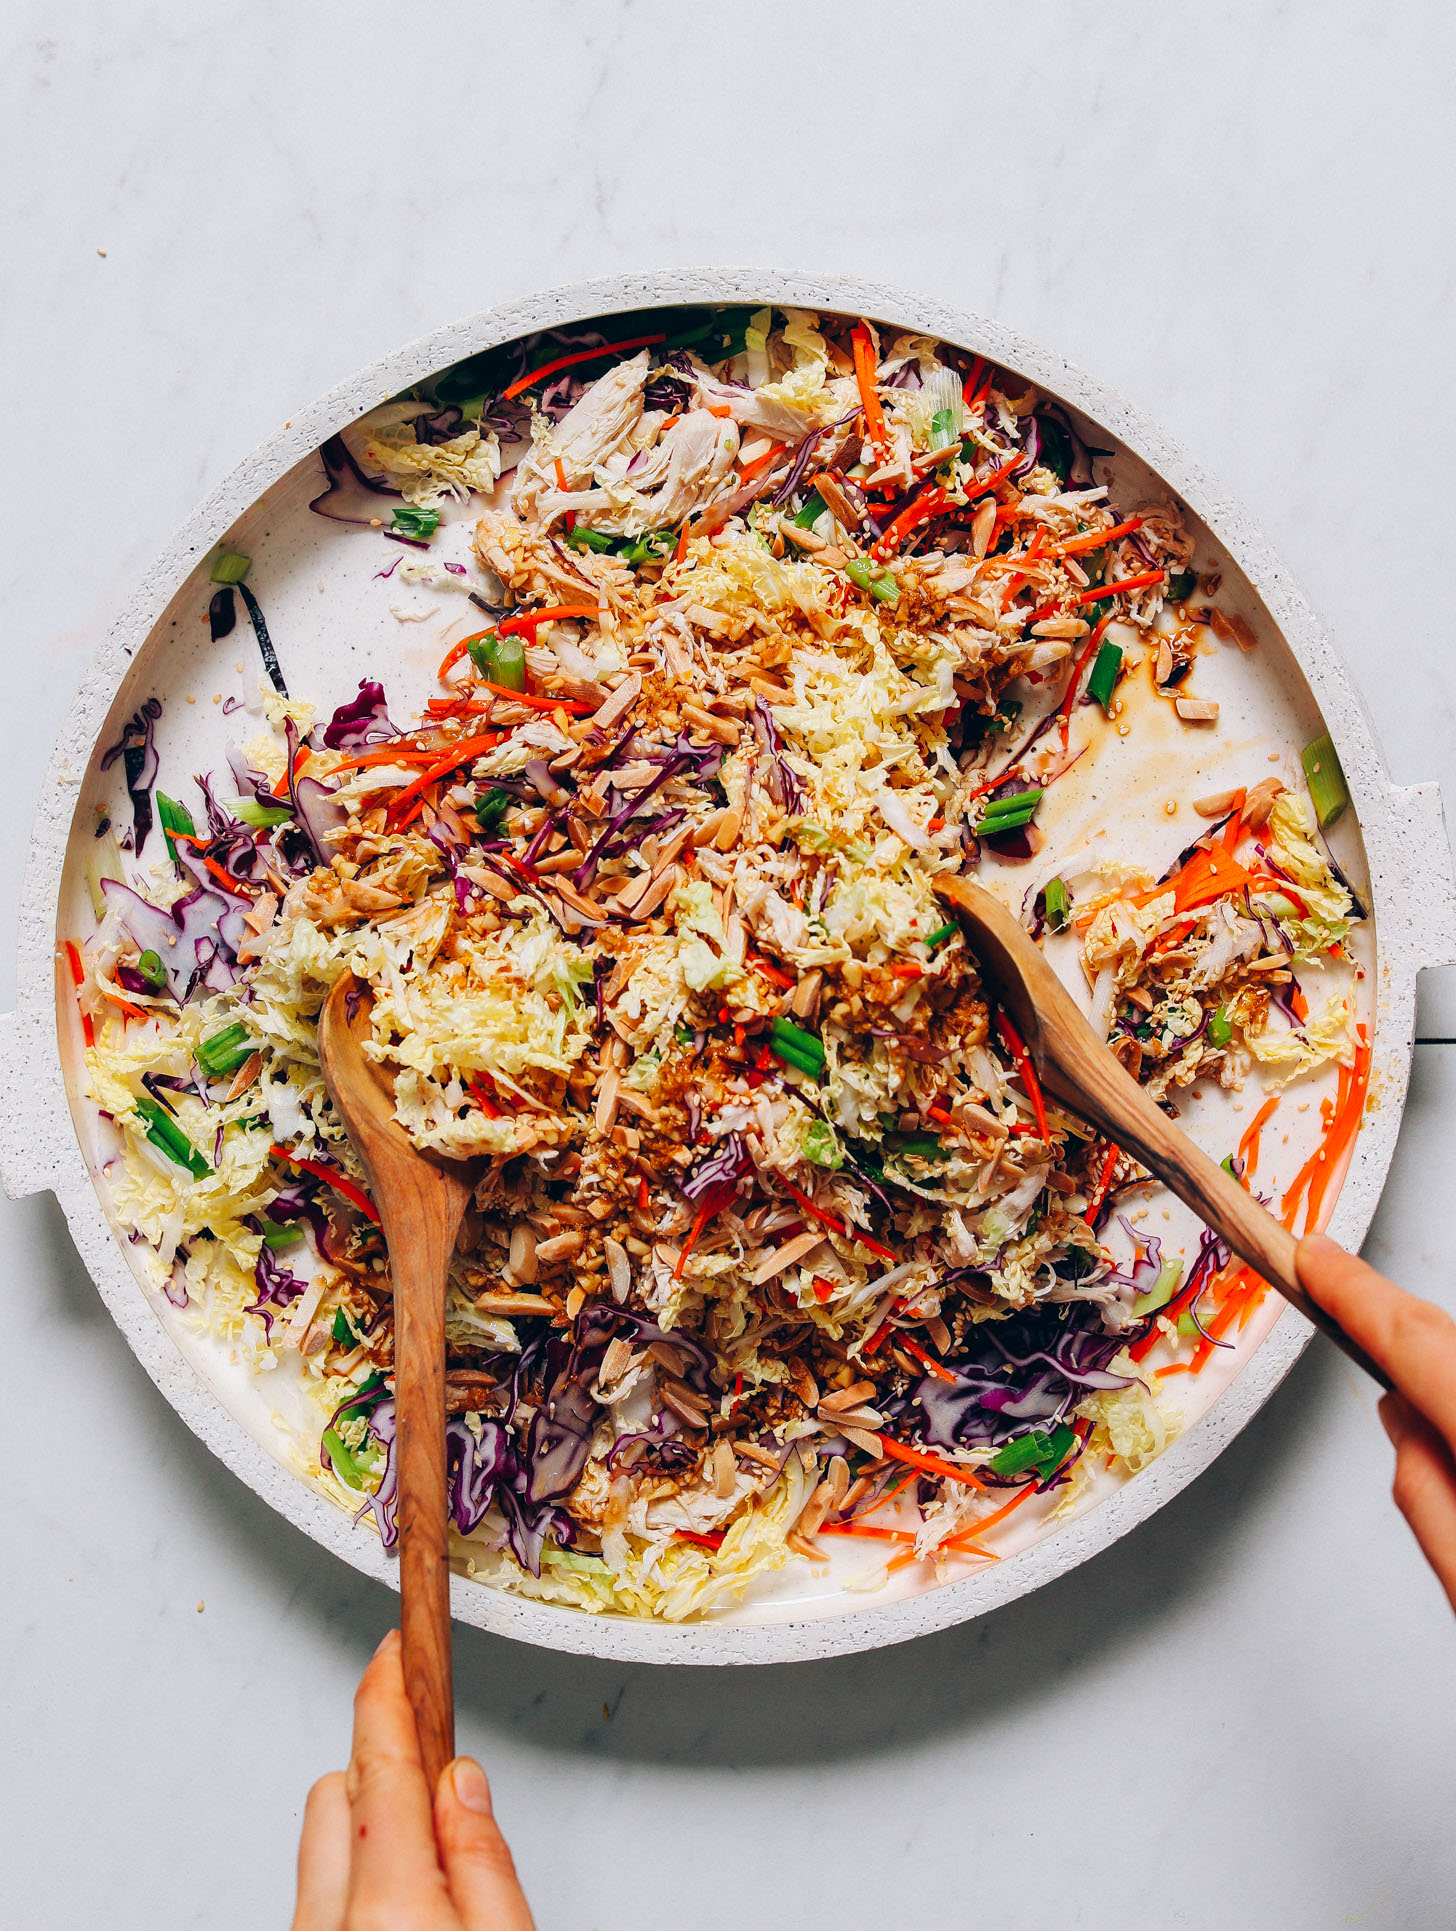 Using salad tongs to pick up a serving of Crunchy Cabbage Slaw made without soy or gluten